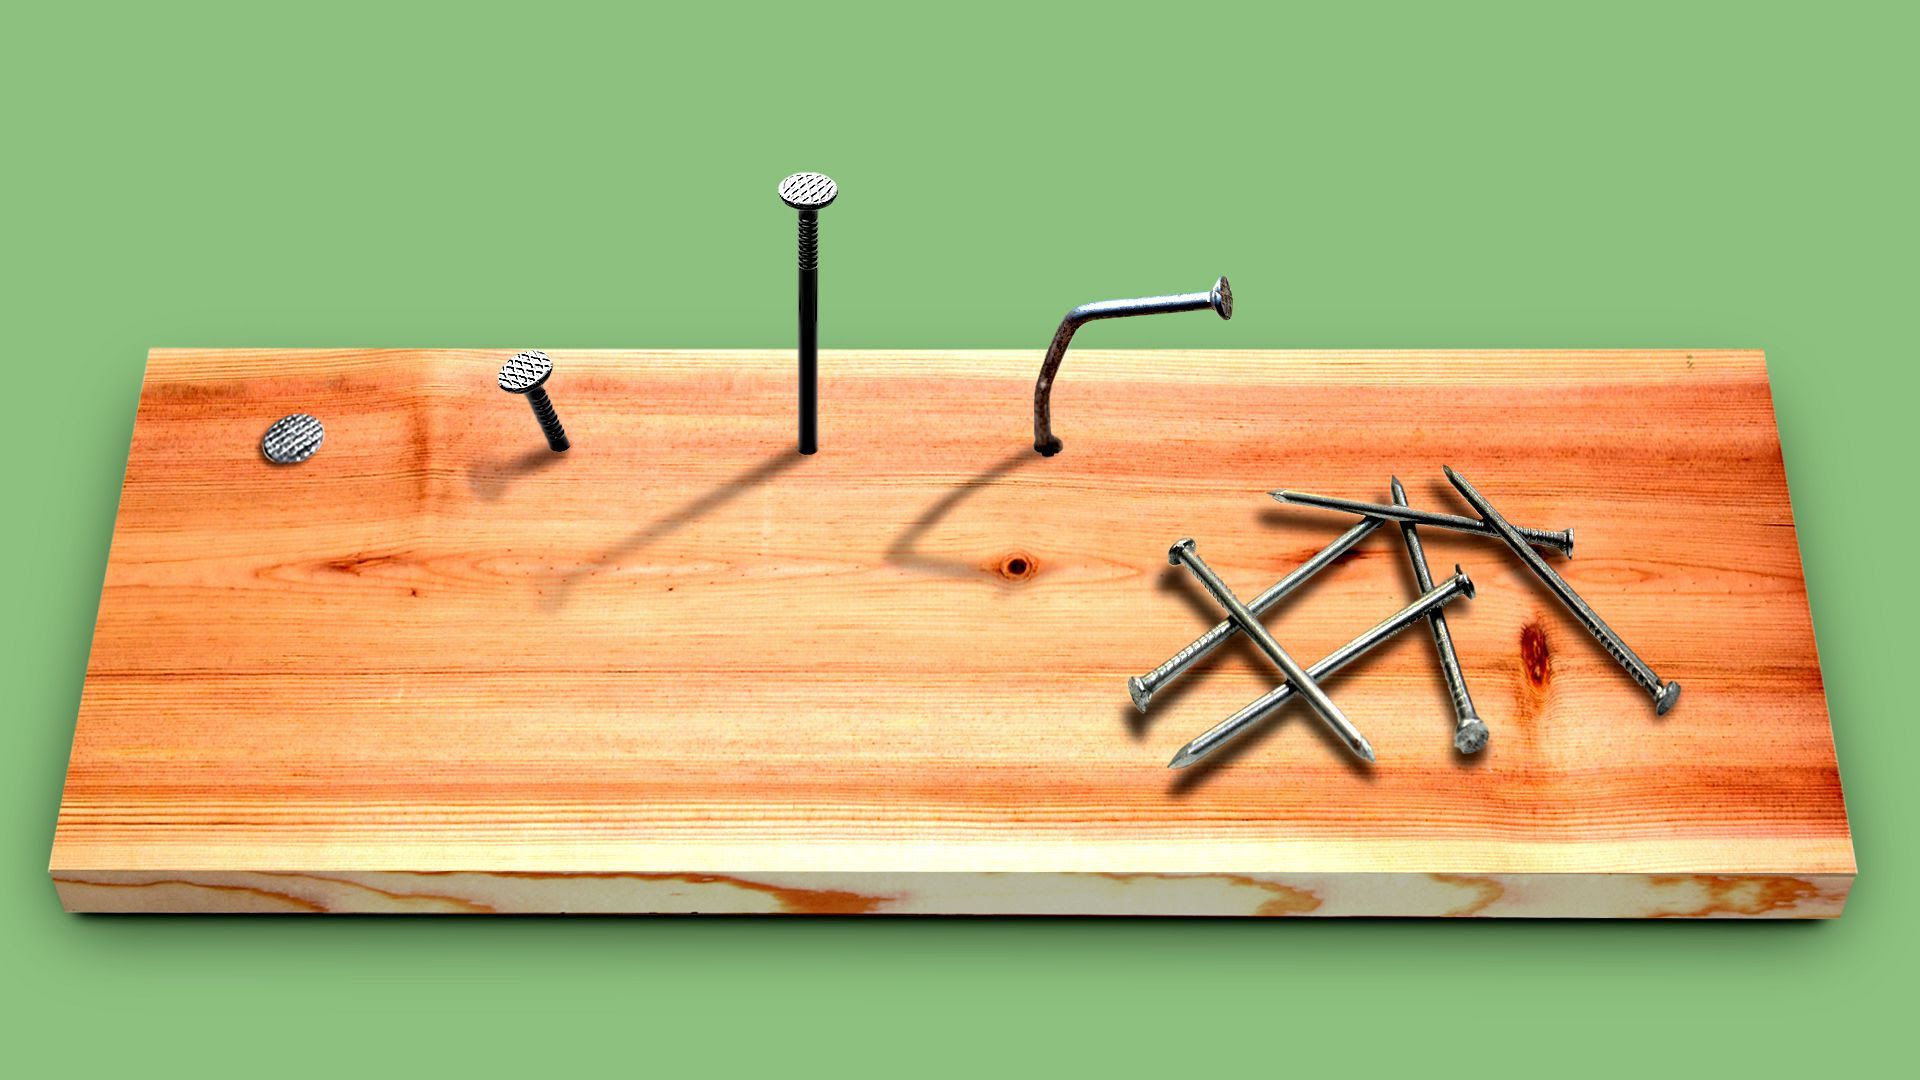 Illustration of screws on a wooden plank. One of the screws is bent. 